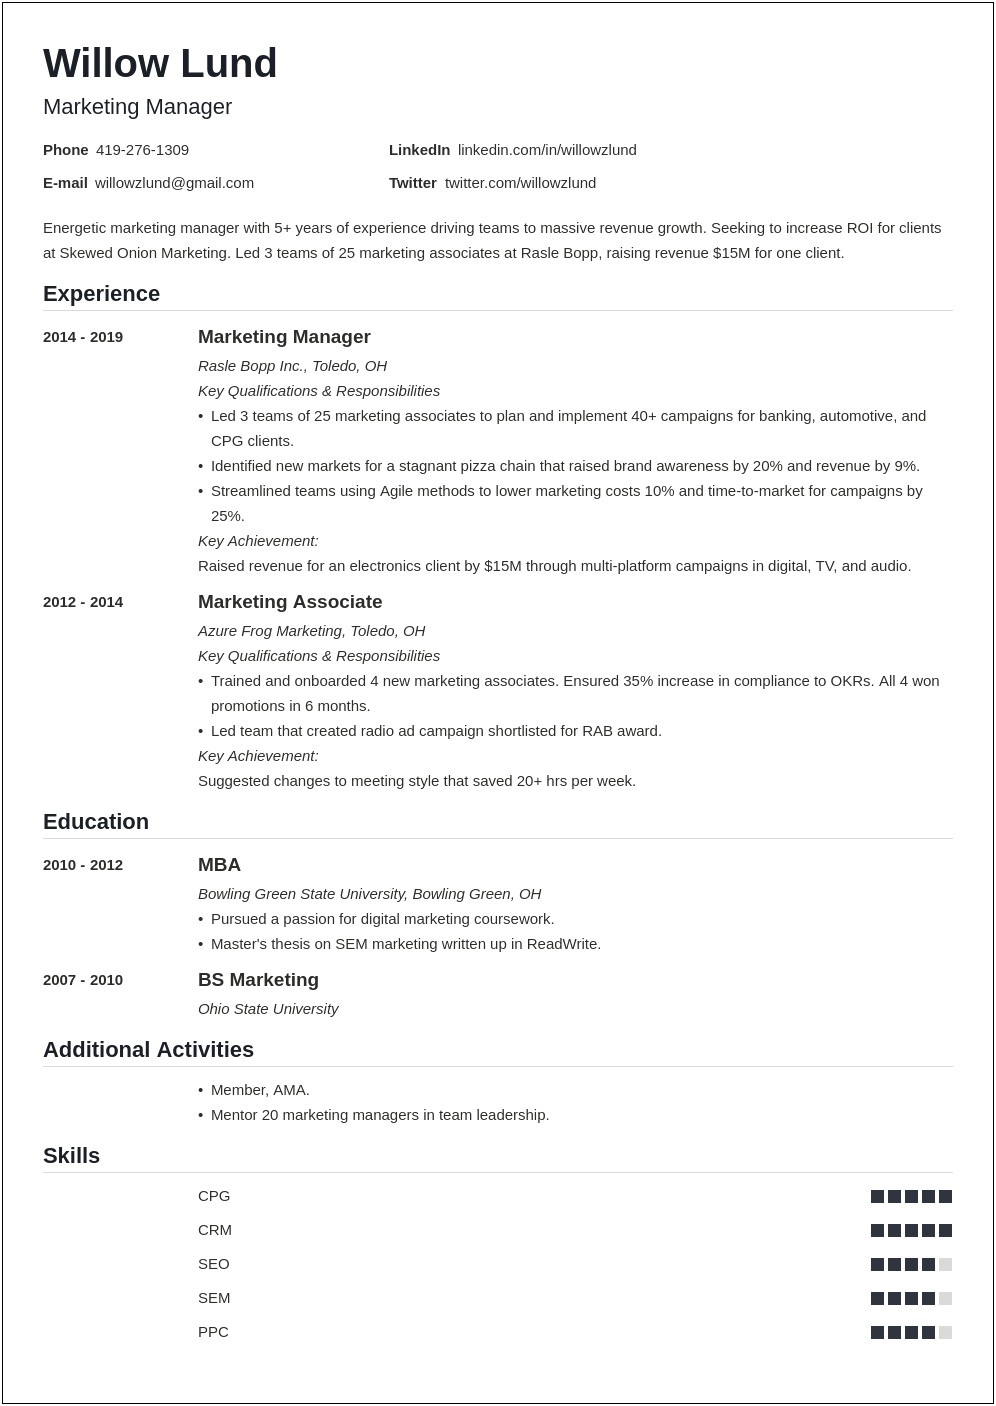 Sample Resume For Experienced Digital Marketing Manager